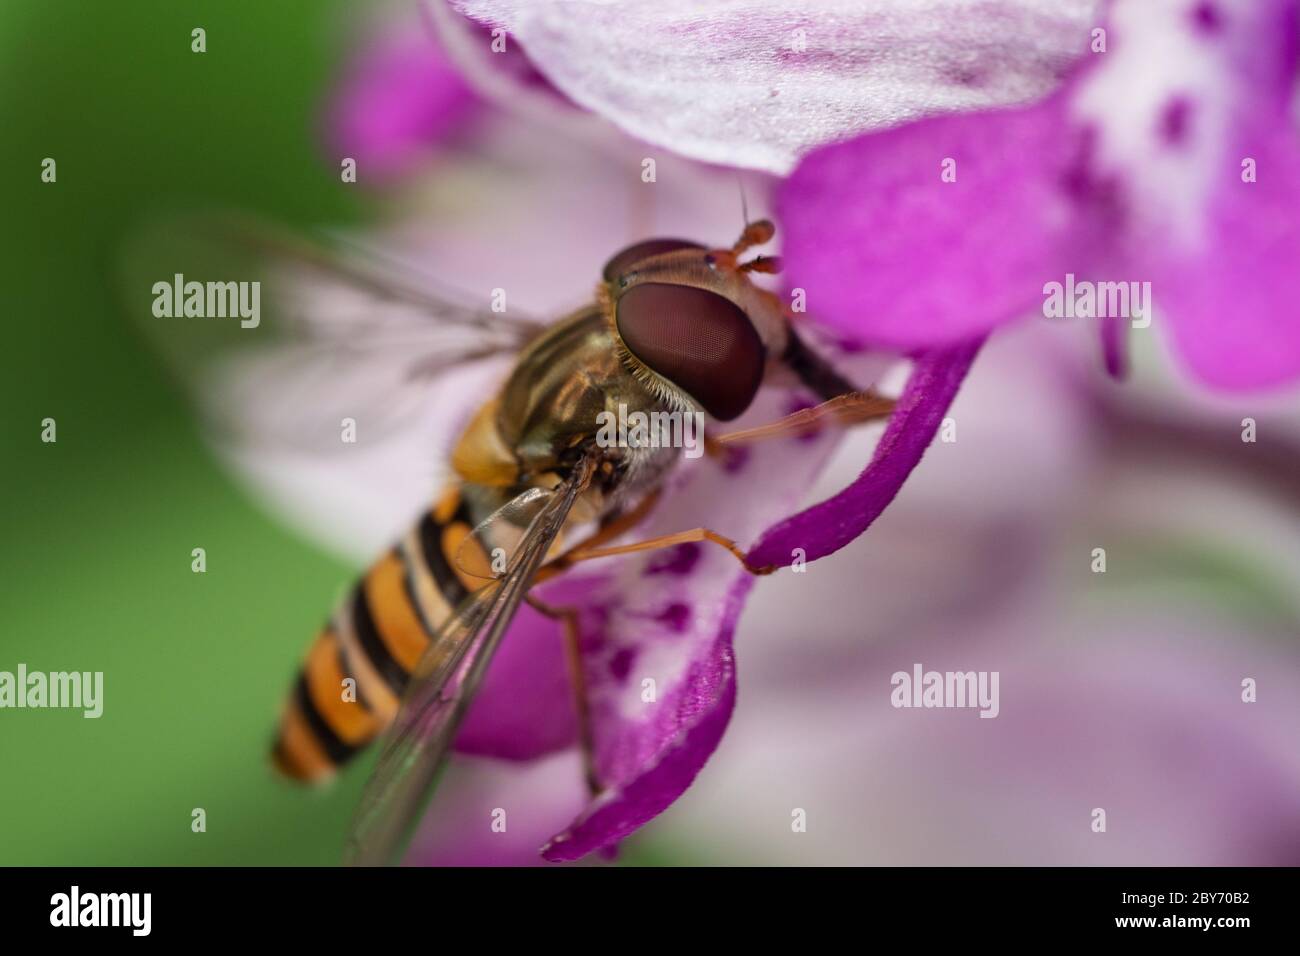 Close-up of small hoverfly on pink orchid Stock Photo